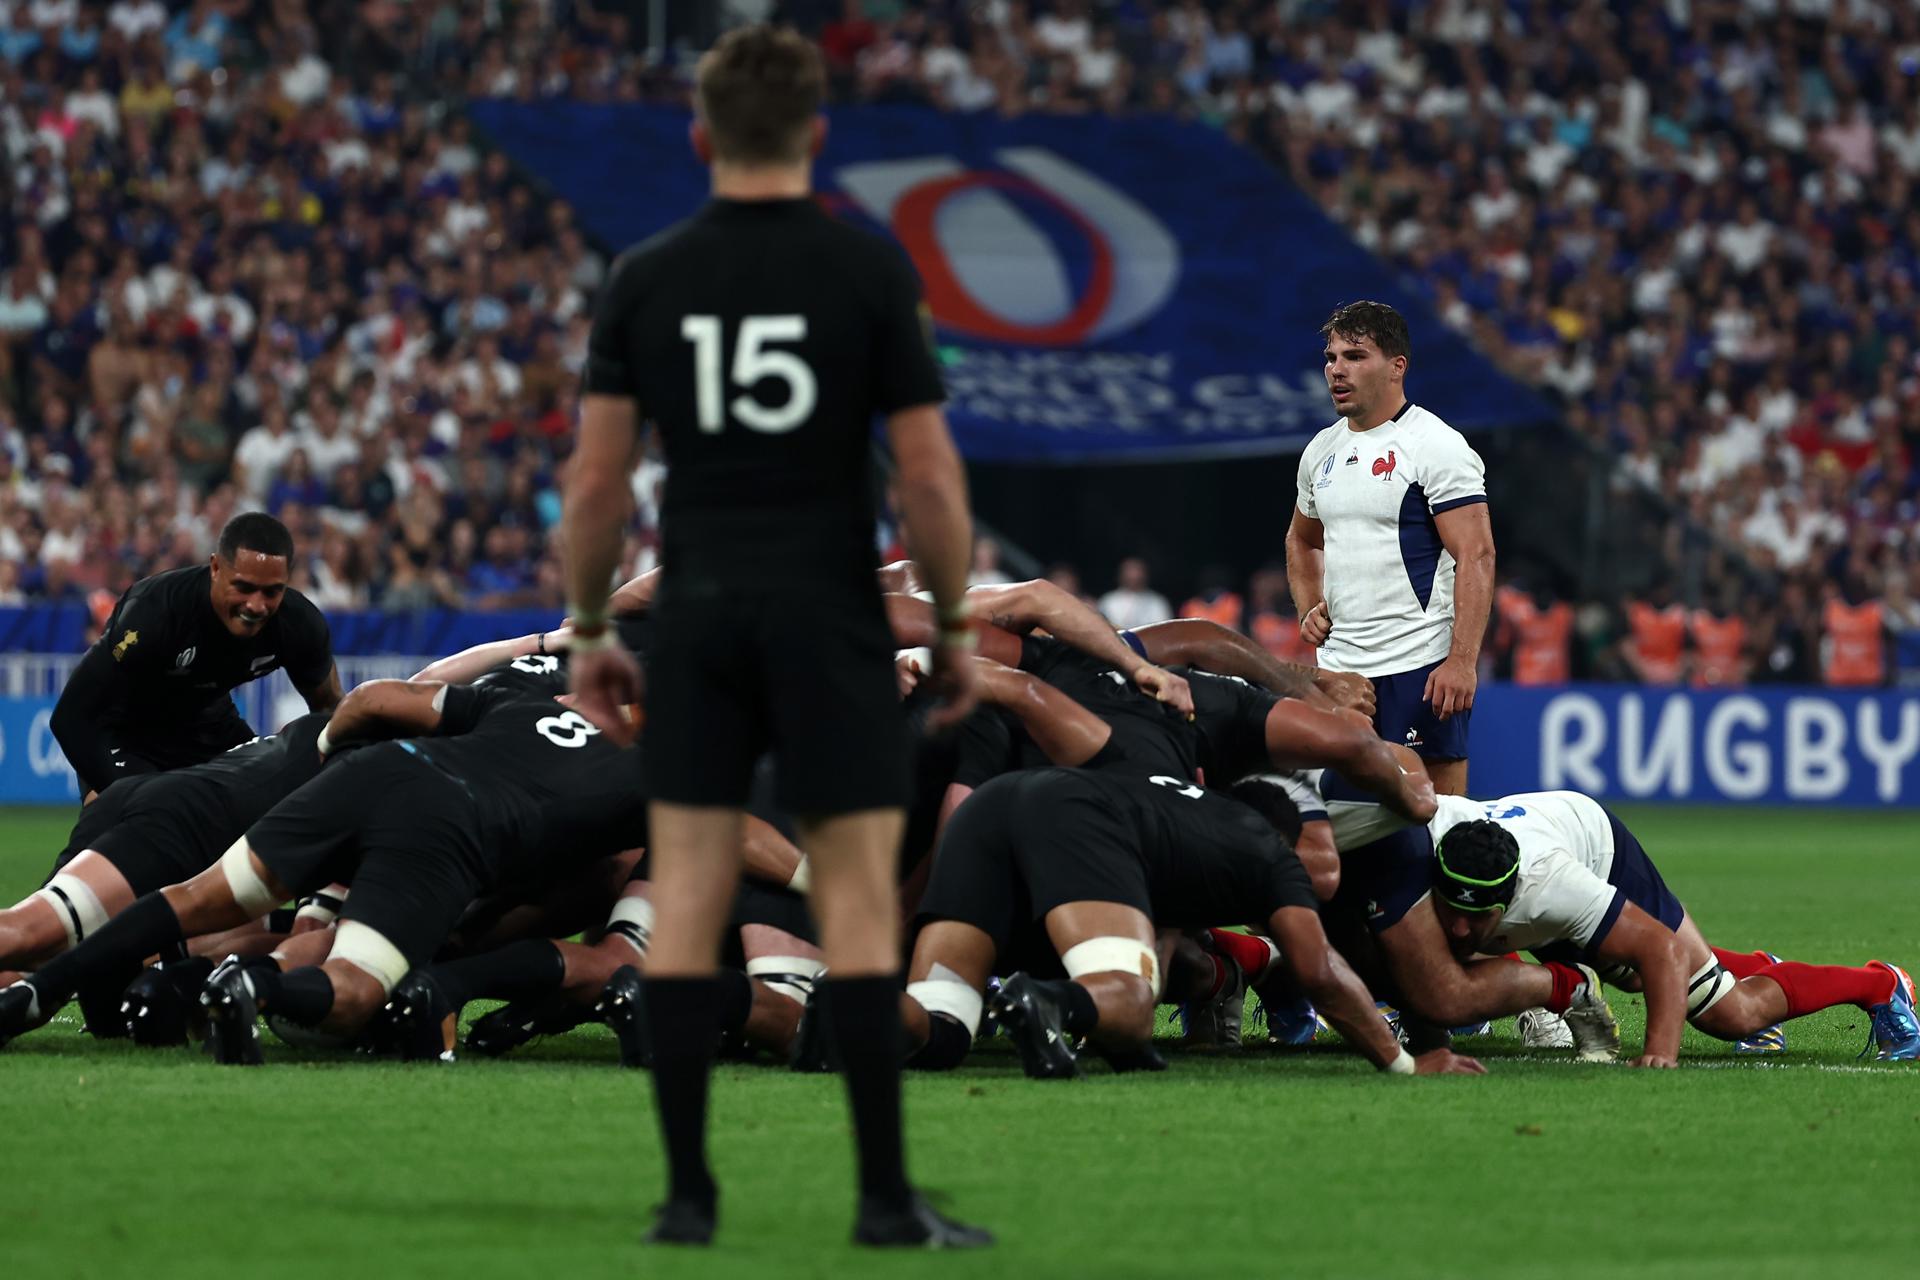 New Zealand's Beauden Barrett (back) looks at Antoine Dupont (R) of France as other players participate in a scrum during the Rugby World Cup Pool A match between France and New Zealand in Saint-Denis, near Paris, France, 08 September 2023. EFE-EPA/MOHAMMED BADRA
